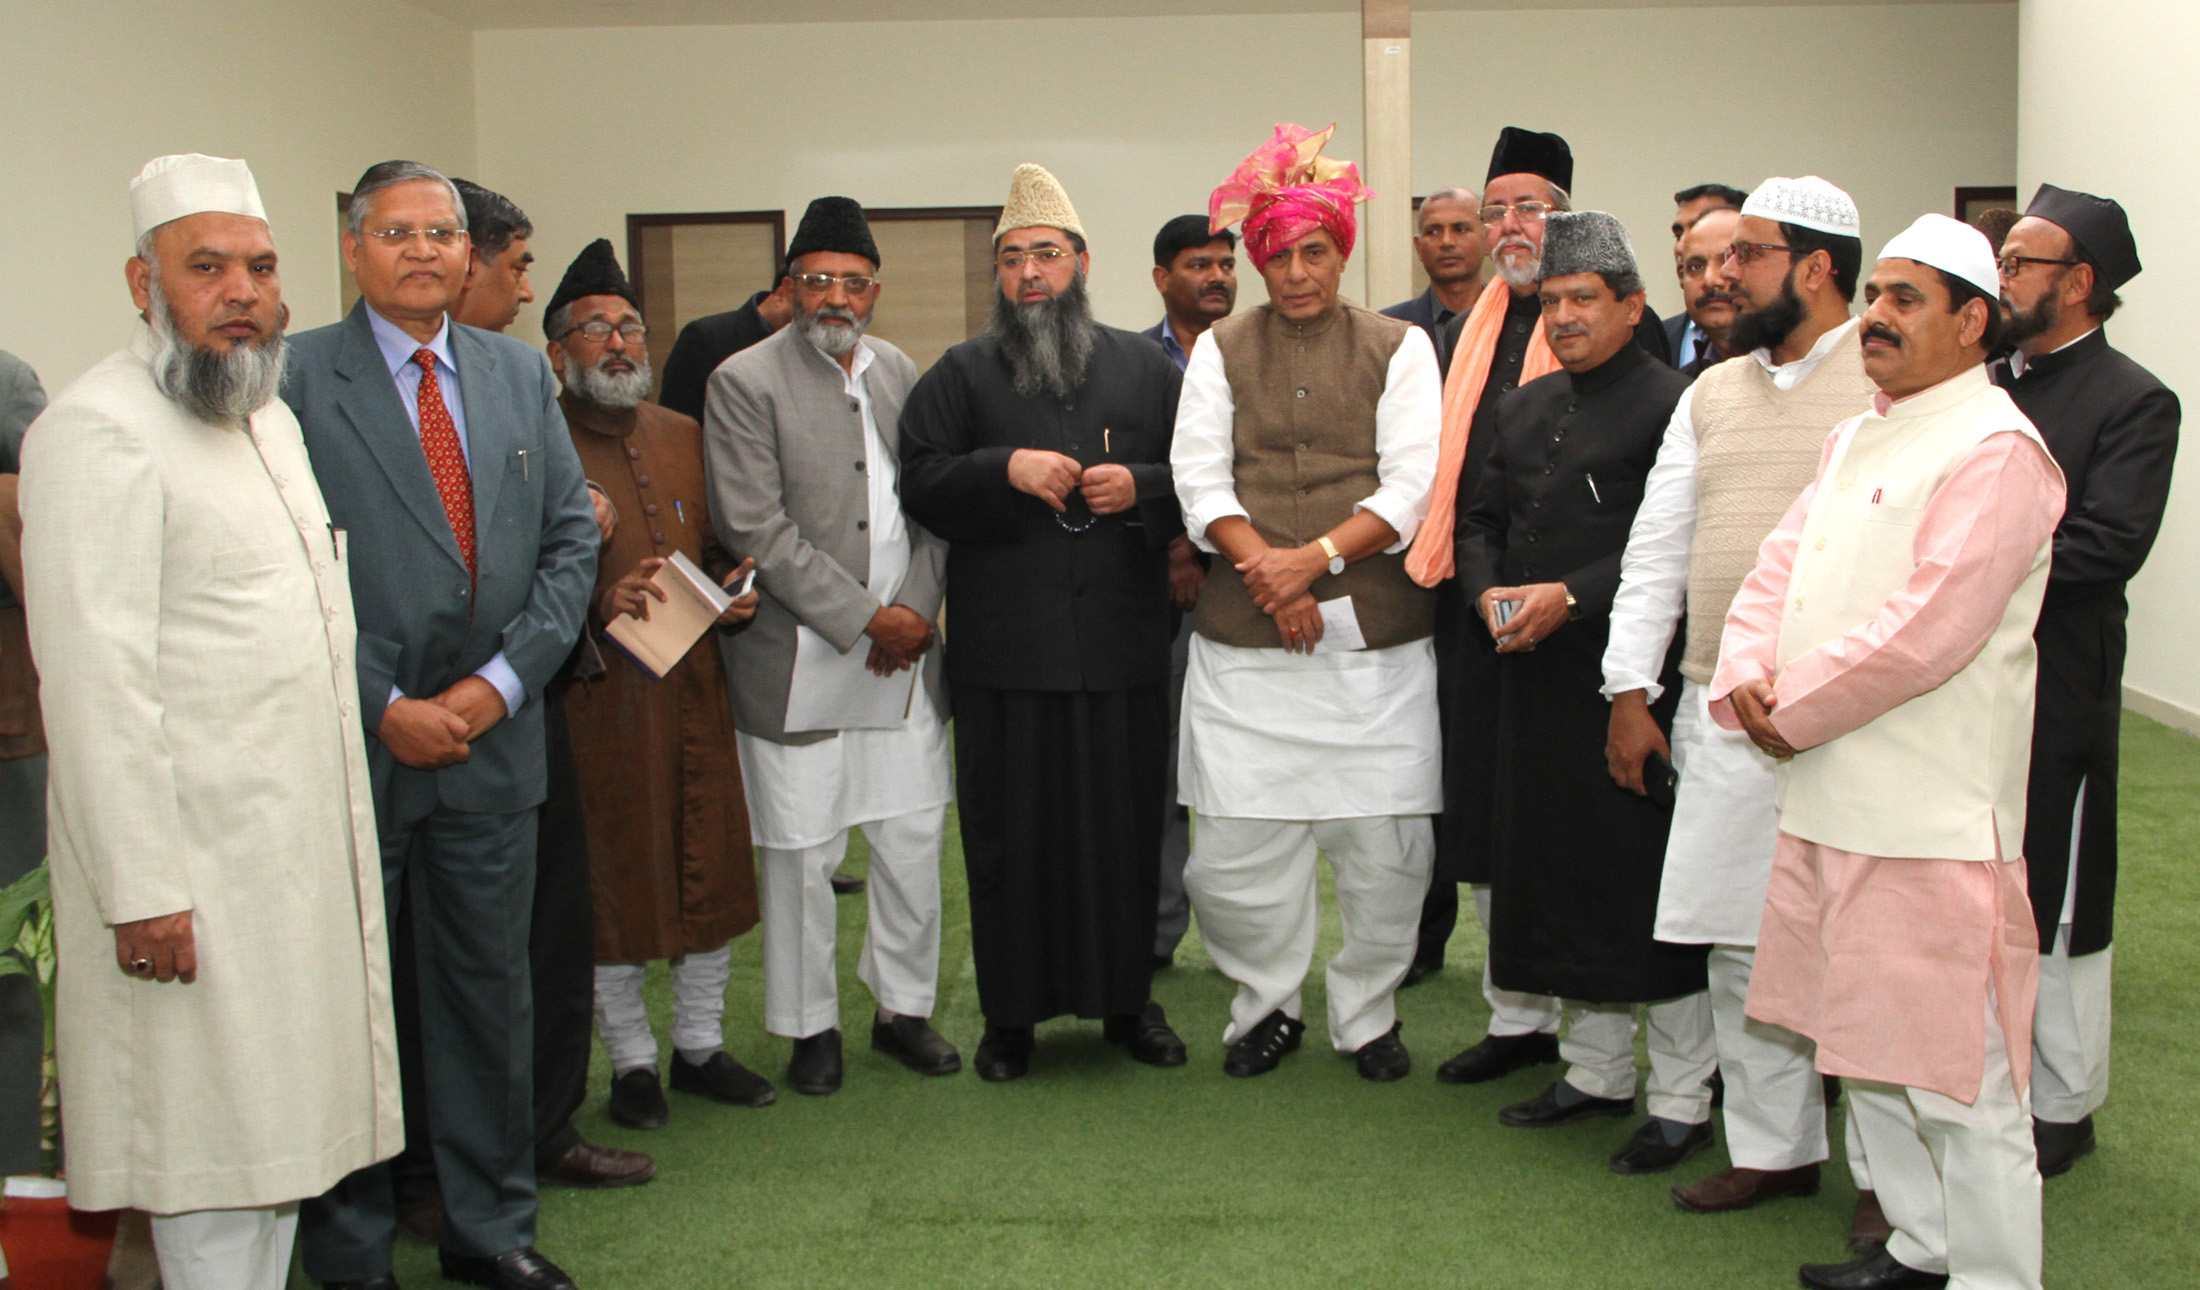 The Union Home Minister, Shri Rajnath Singh in a group photo with the Muslim clergies and social leaders, in New Delhi on February 02, 2016.